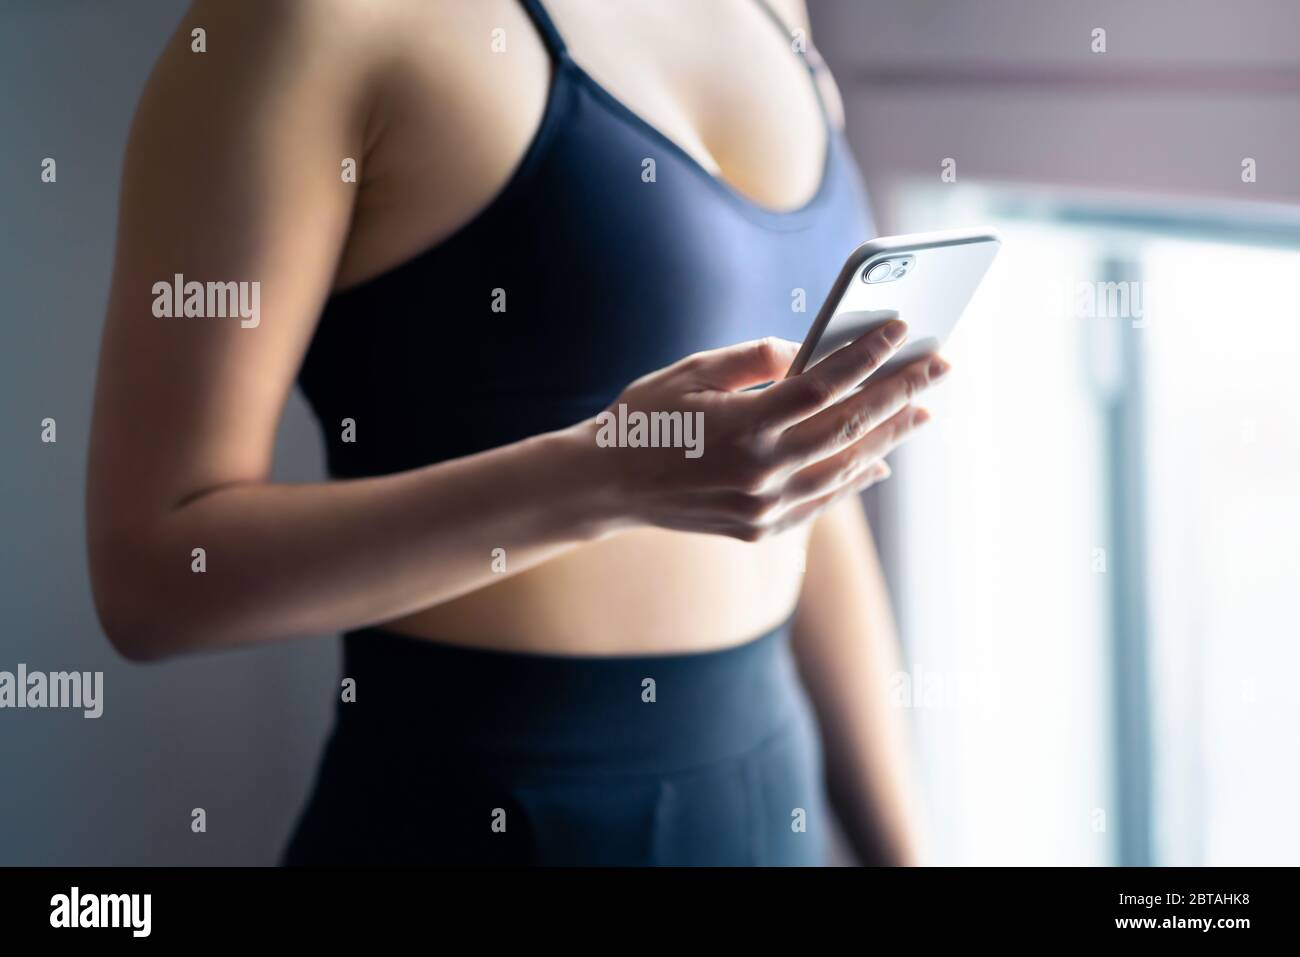 Fit woman using phone. Gym workout and exercise with sport tracker mobile app in smartphone. Athlete, fitness model, health expert, personal trainer. Stock Photo